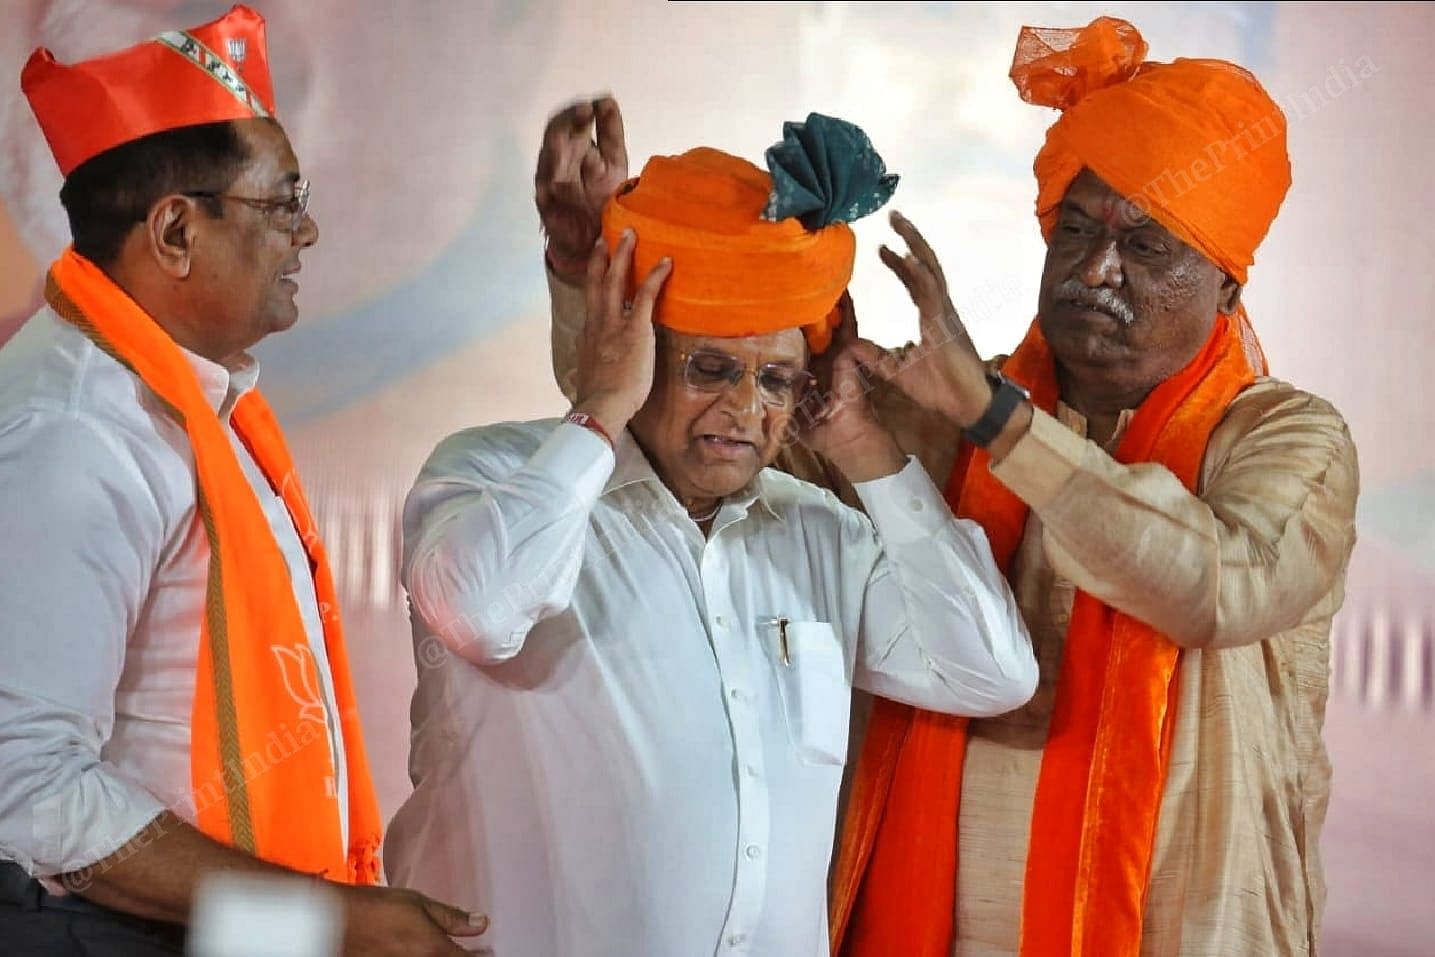 During the rally, BJP leaders paid tribute to CM Bhupendra Patel by wearing turbans. Photo: Praveen Jain |  impression